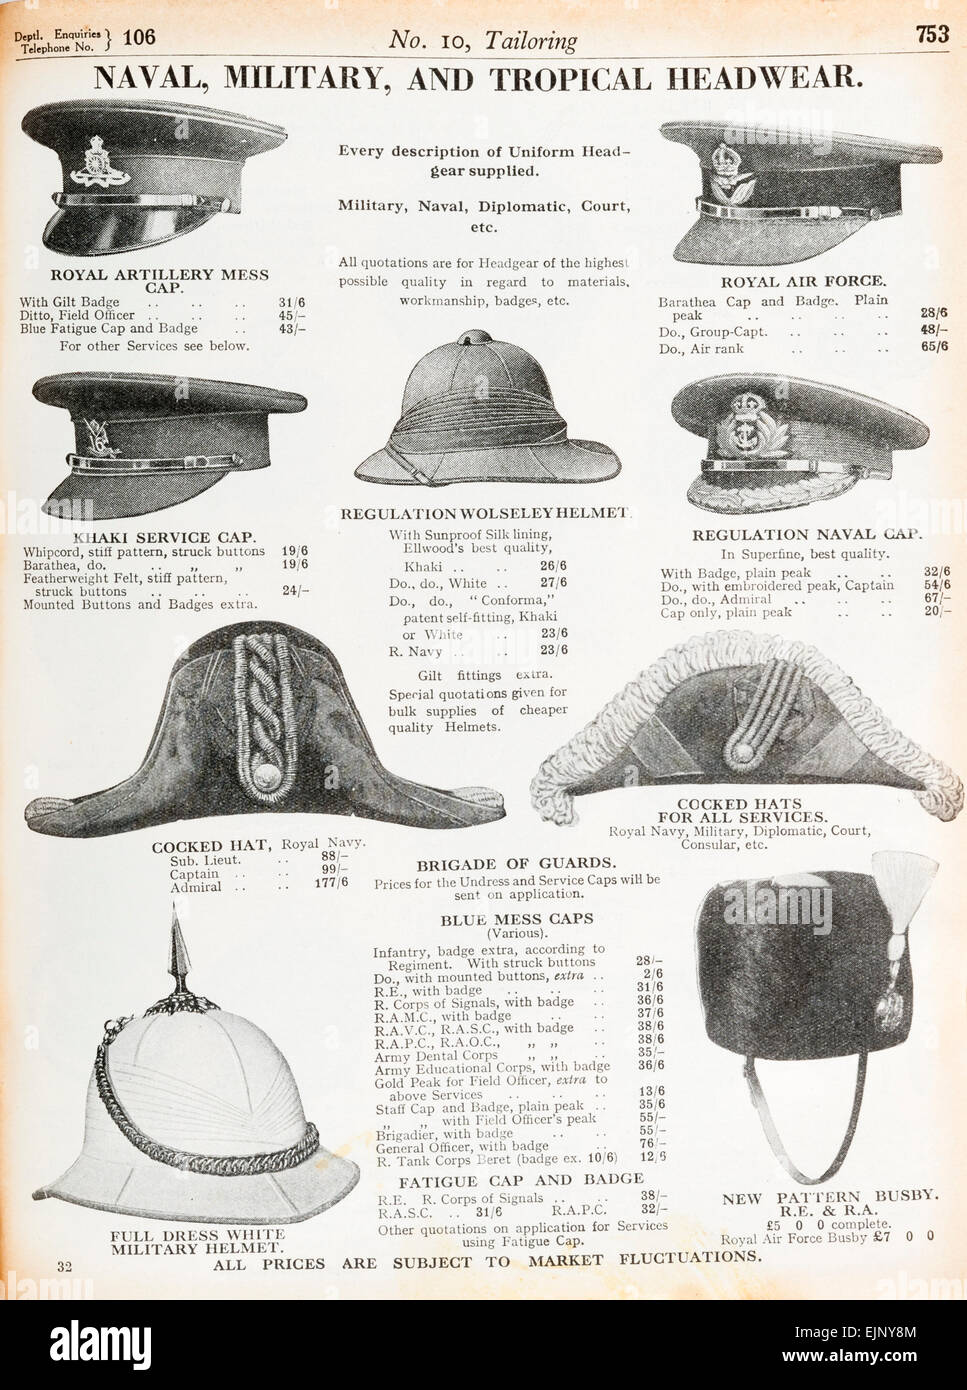 From the Army and Navy Stores prewar mail order catalogue, (London, UK, 1935) - military headwear for the Army, Navy and Airforce Stock Photo